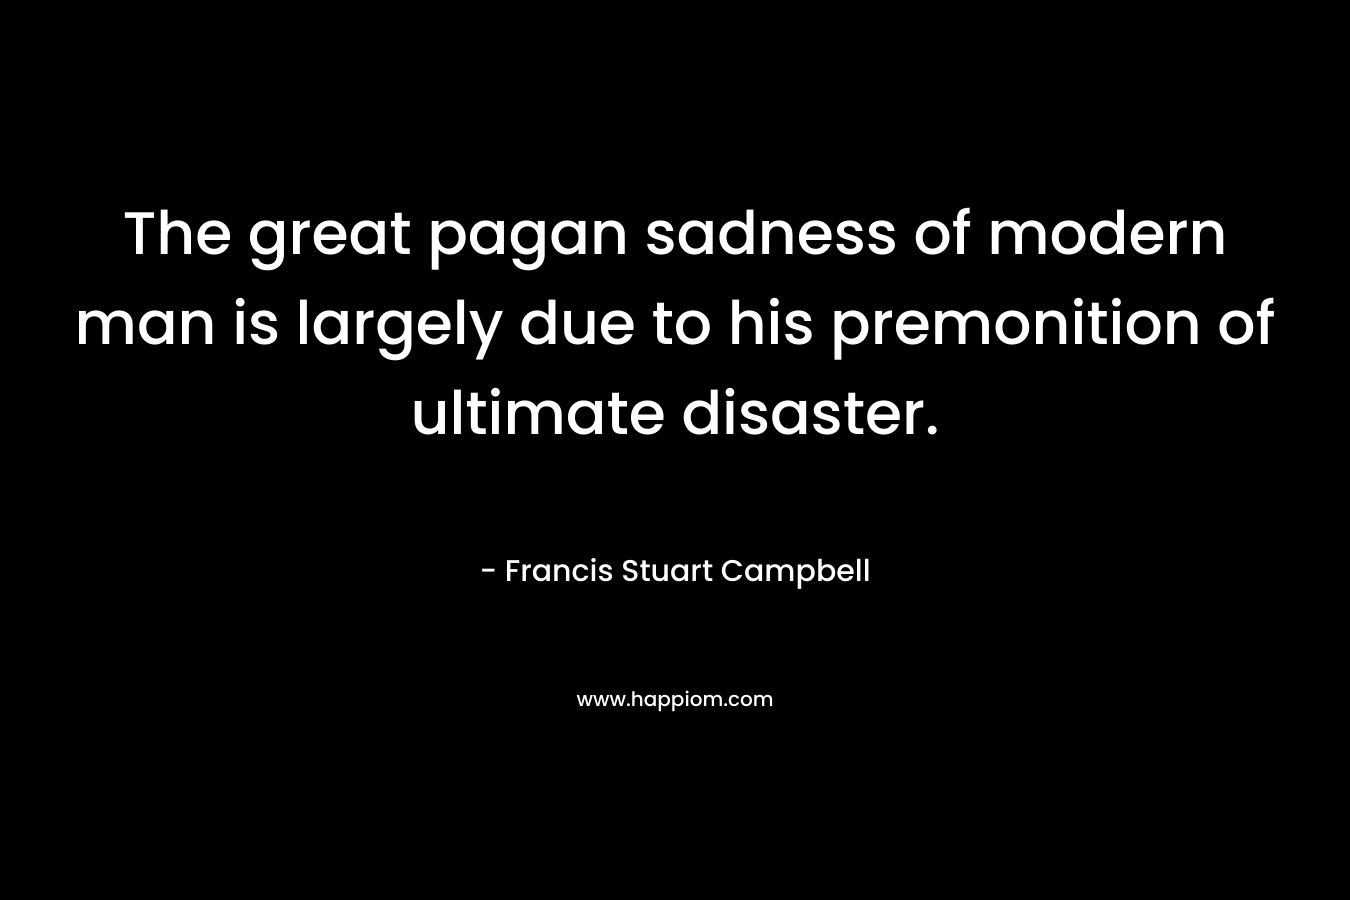 The great pagan sadness of modern man is largely due to his premonition of ultimate disaster.